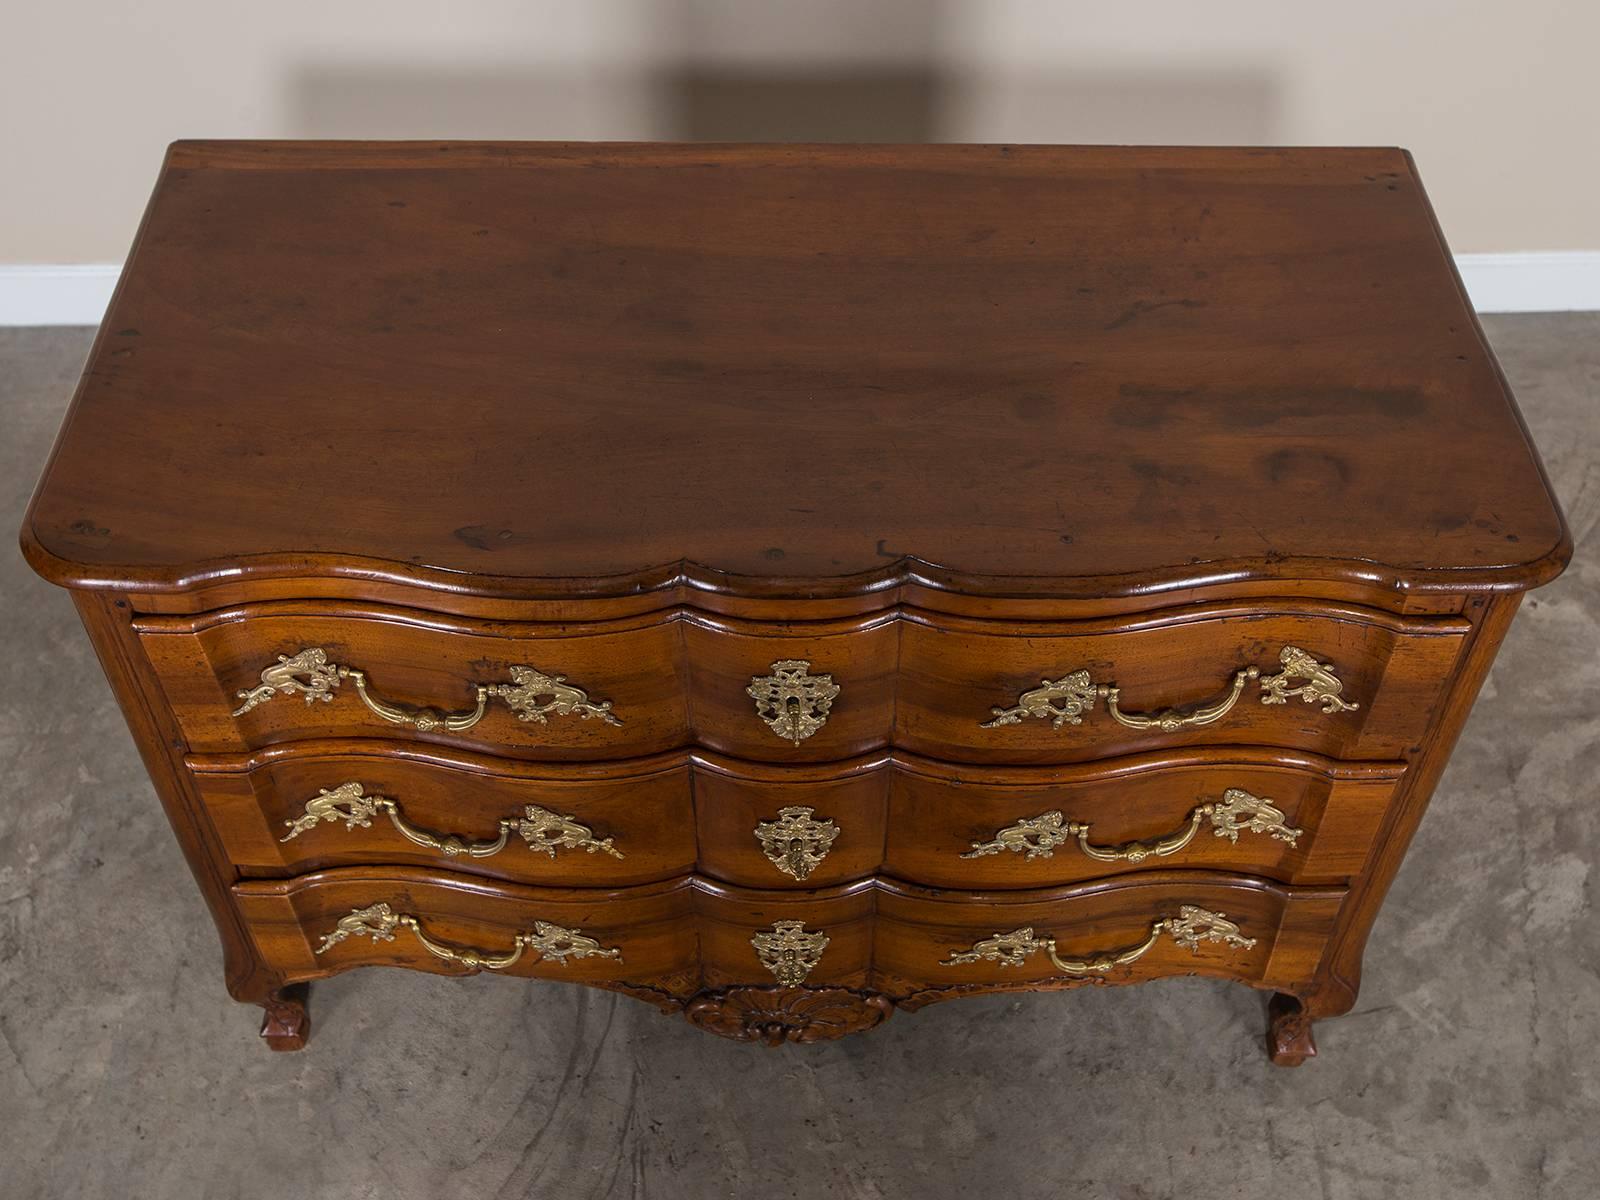 Receive our new selections direct from 1stdibs by email each week. Please click on “Follow Dealer” button below and see them first!

The superb color of the walnut and the excellent proportions of the carved detail on this antique French Louis XV